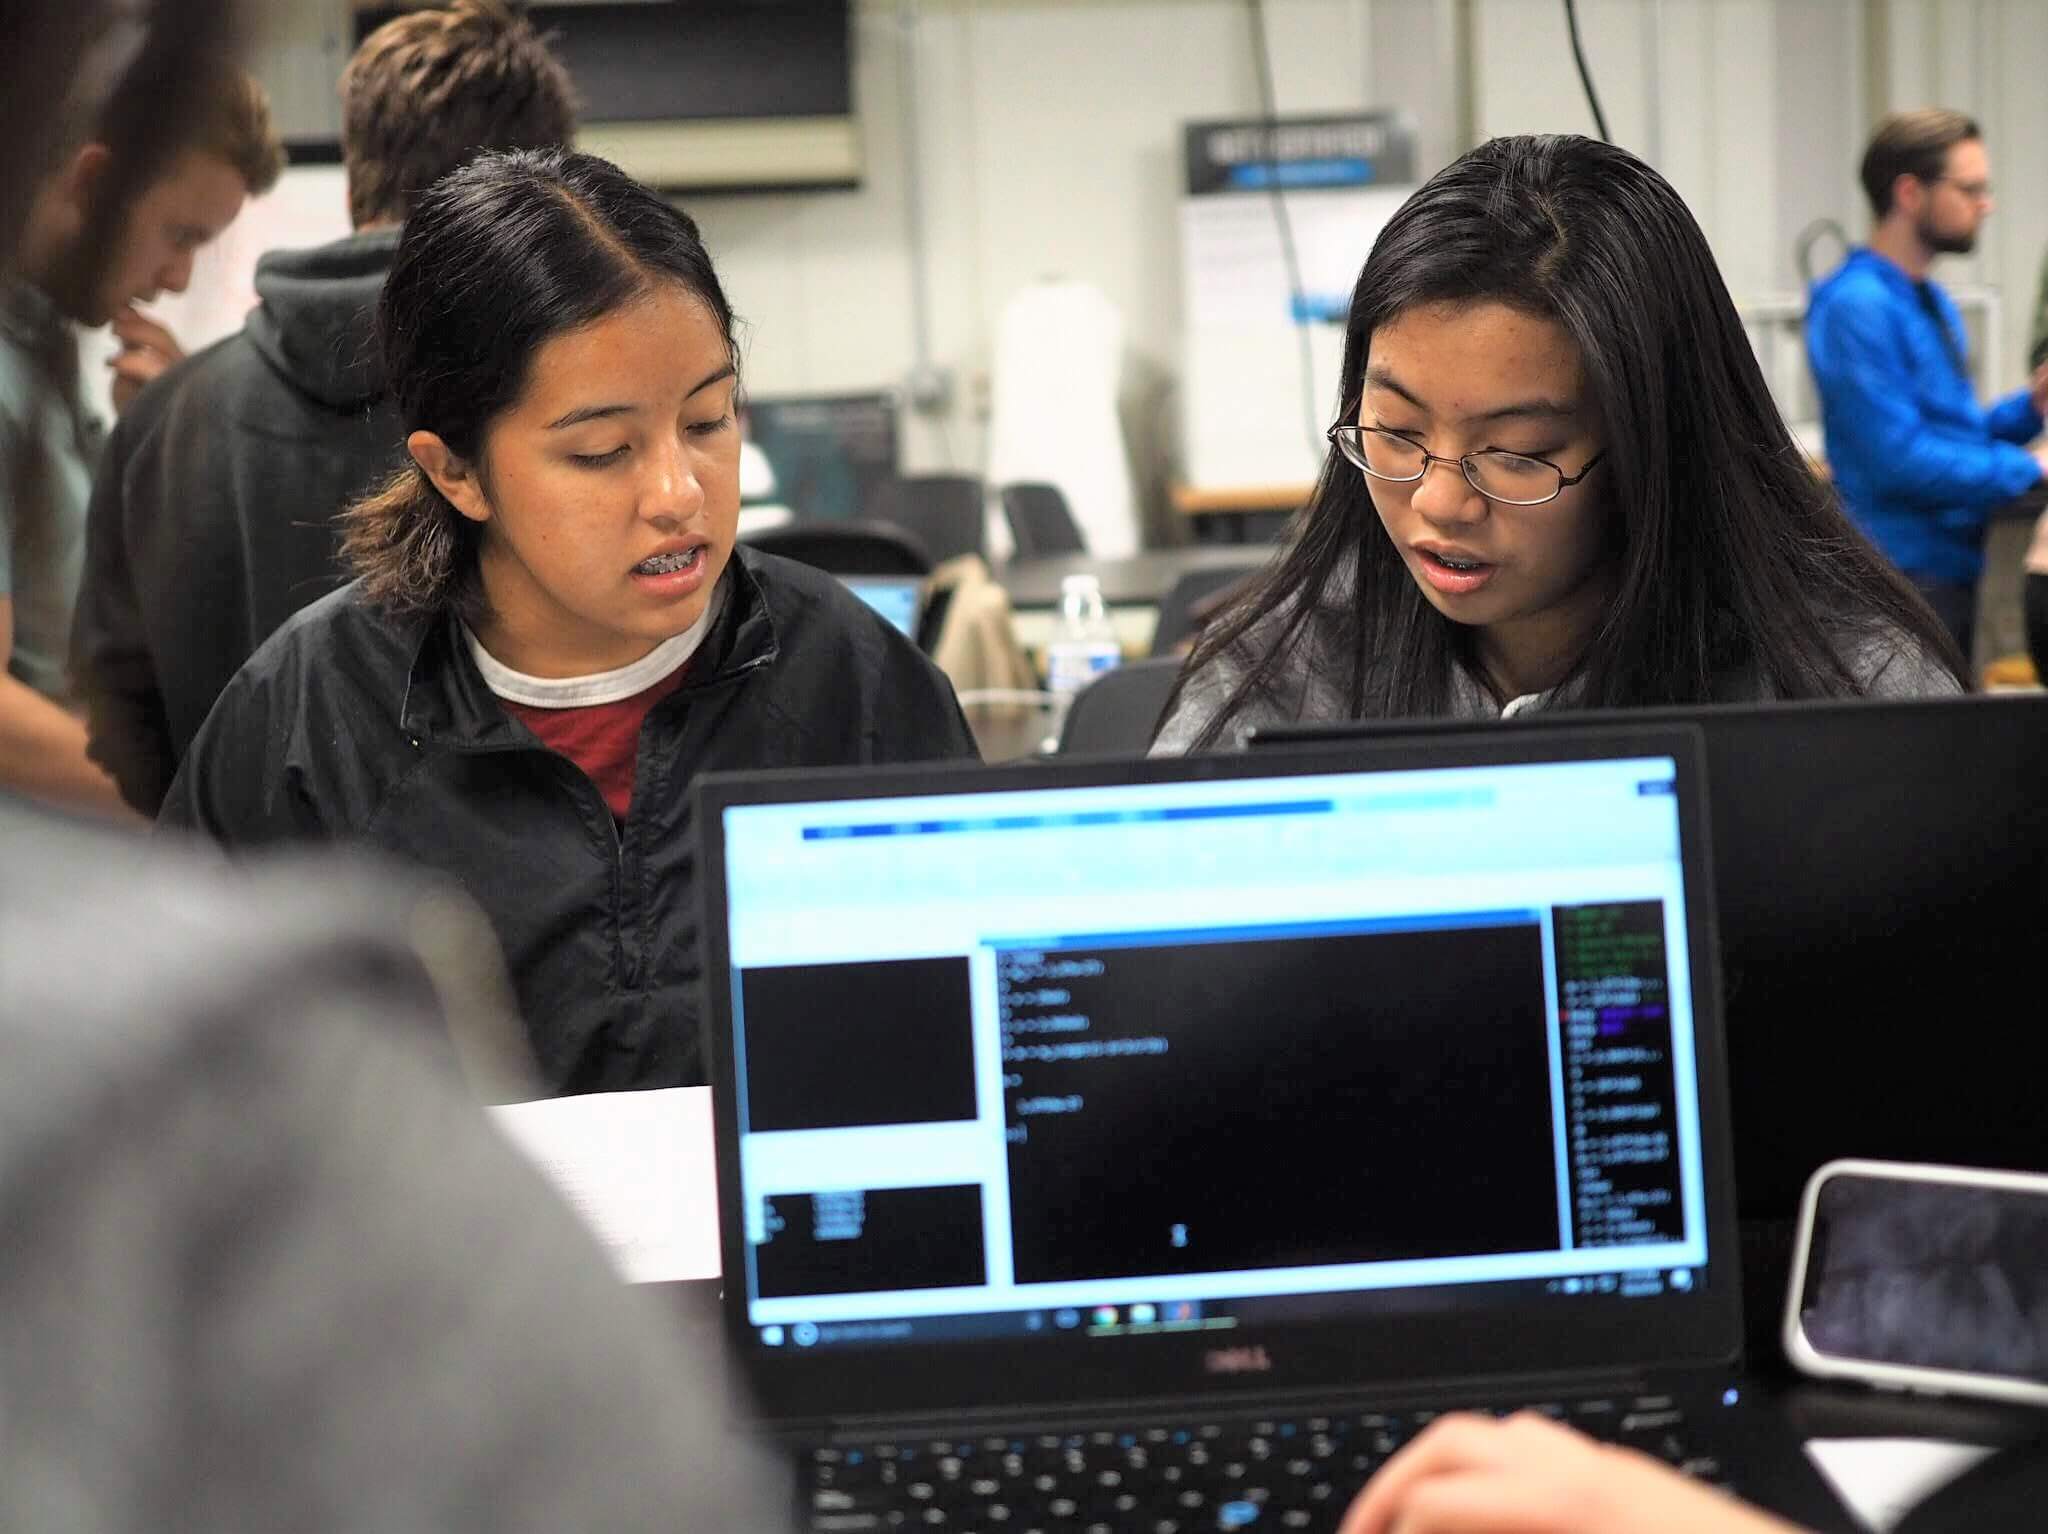 two students work together in a computer science lab